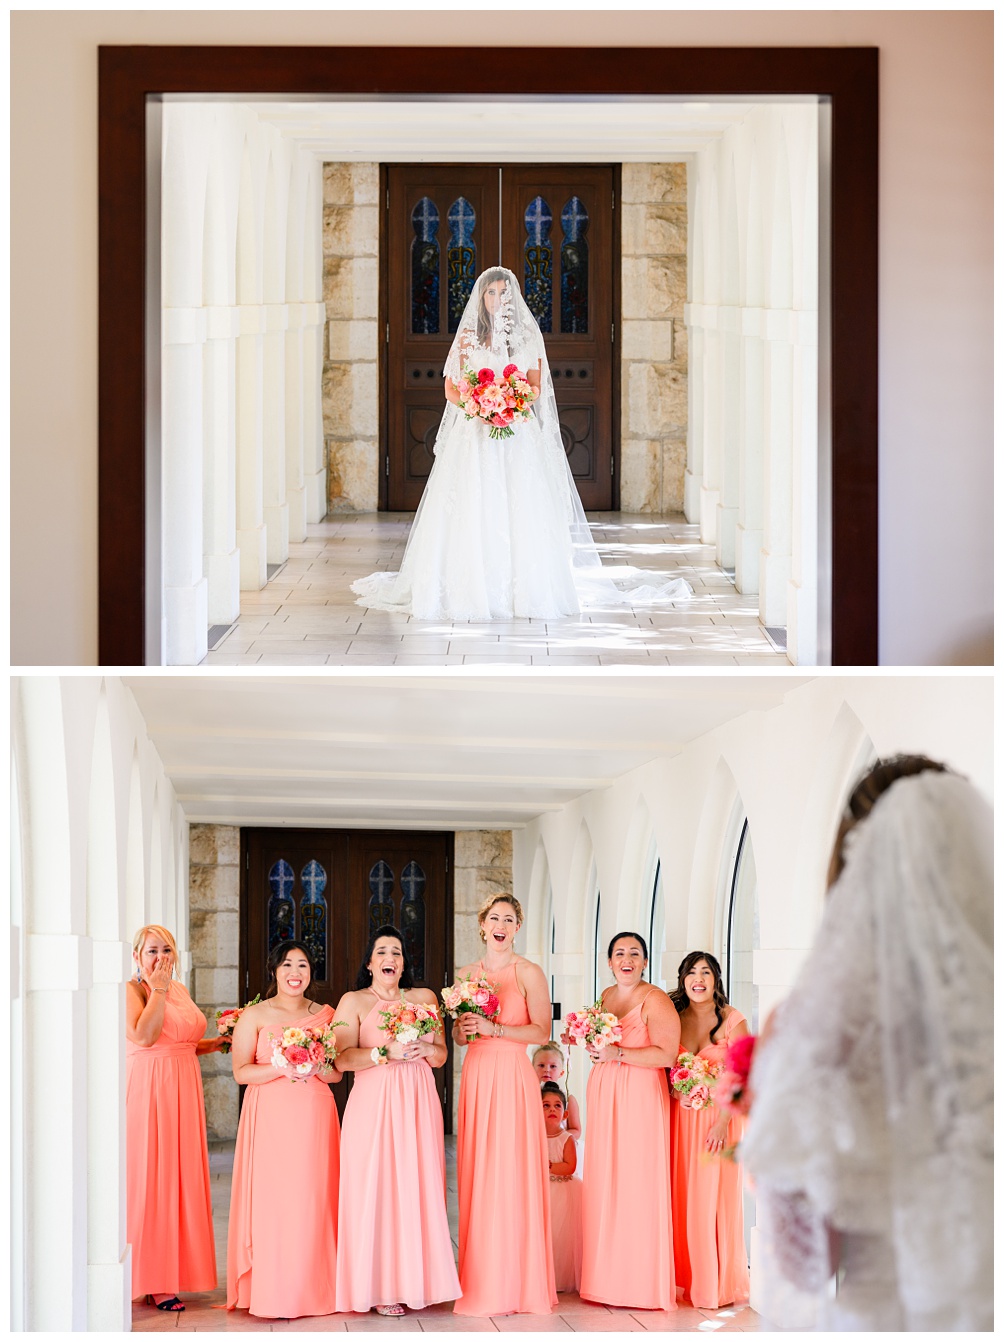 Bridal portraits and bridesmaids first look at St. Mary's Catholic Church in Fredericksburg